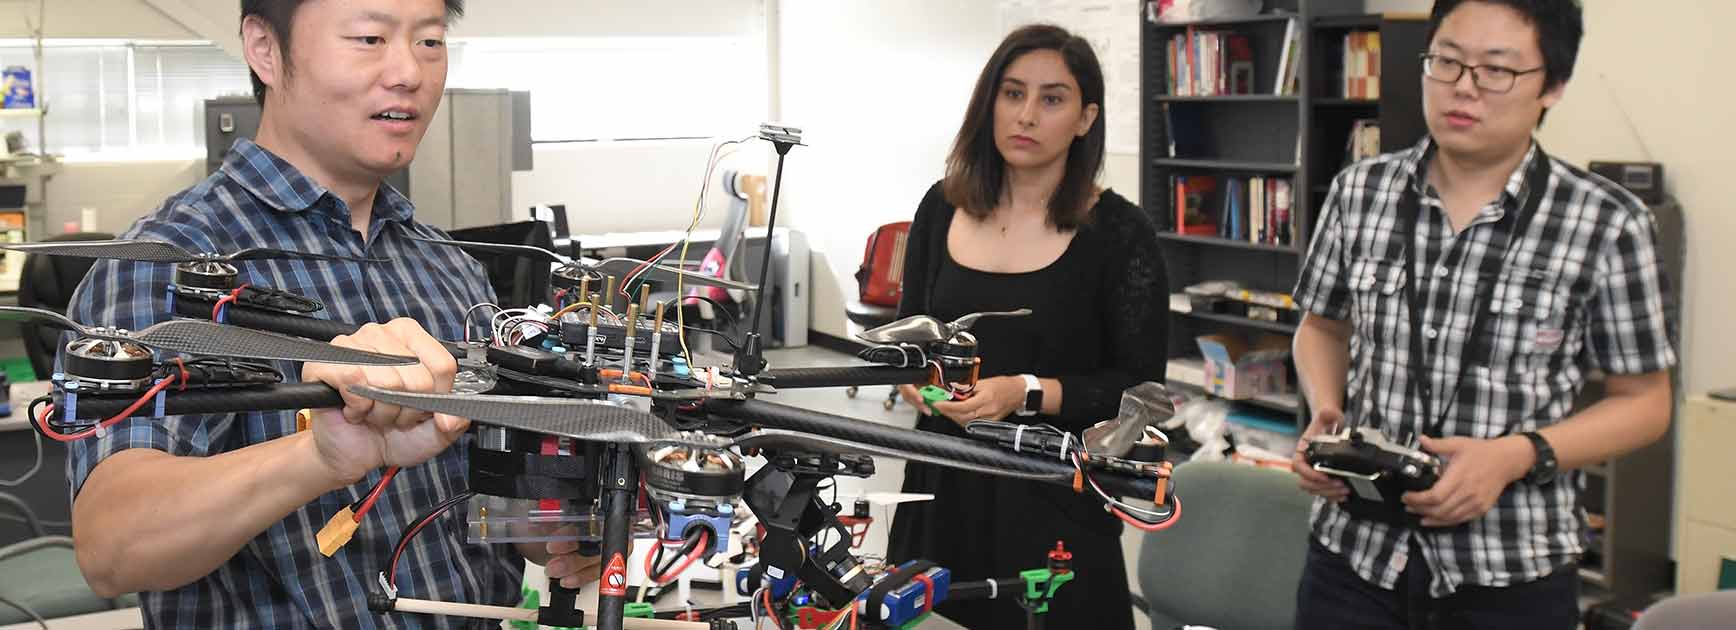 Engineering students working on a drone